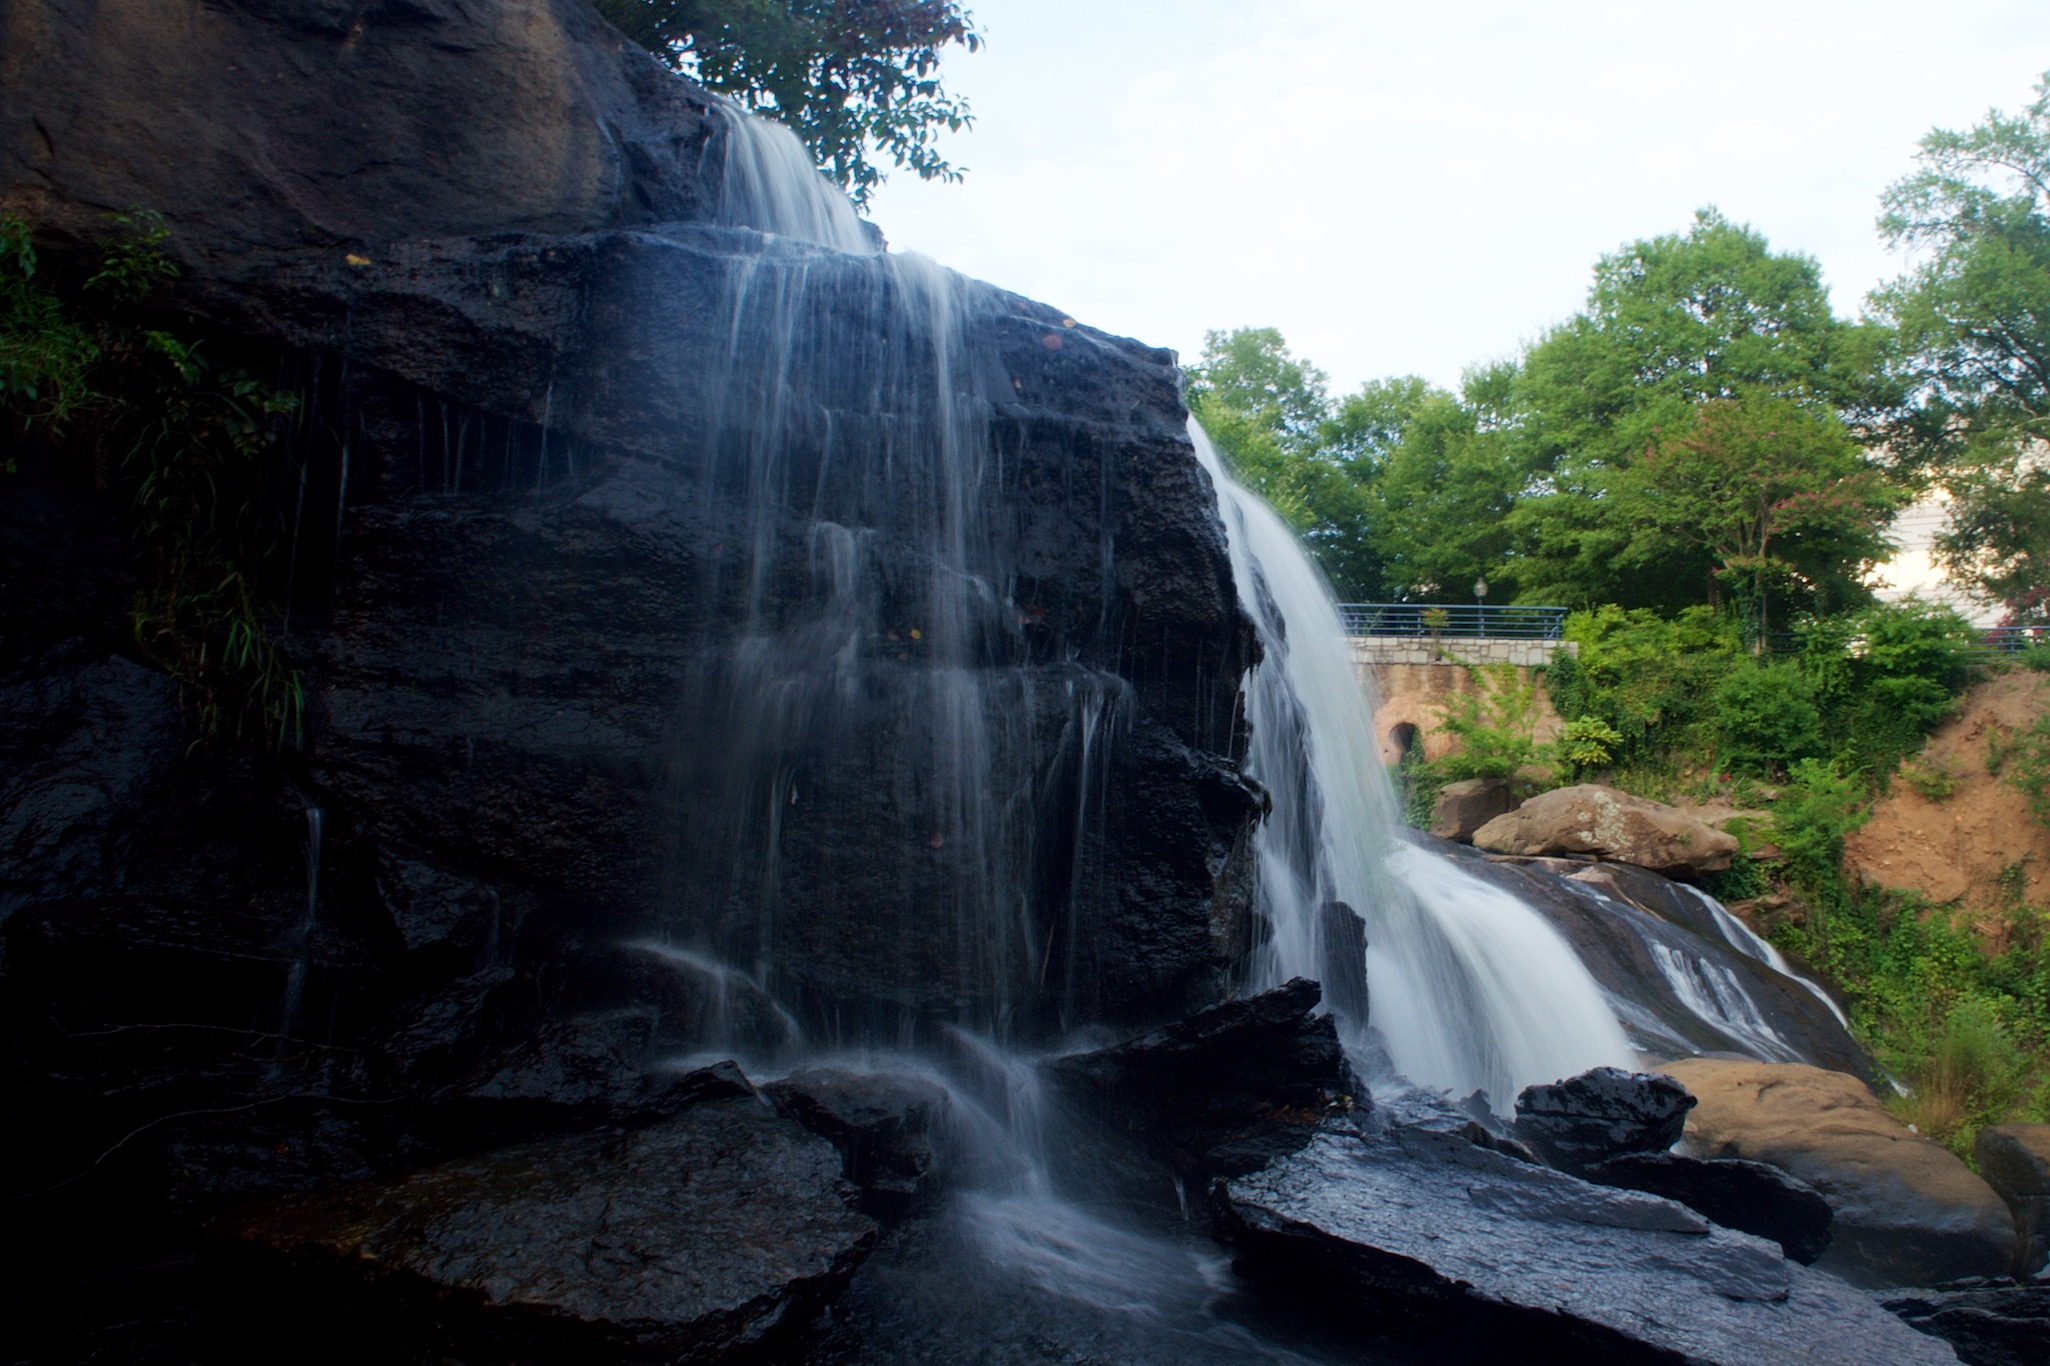 Waterfall in the Reedy River Falls Park in Greenville, South Carolina